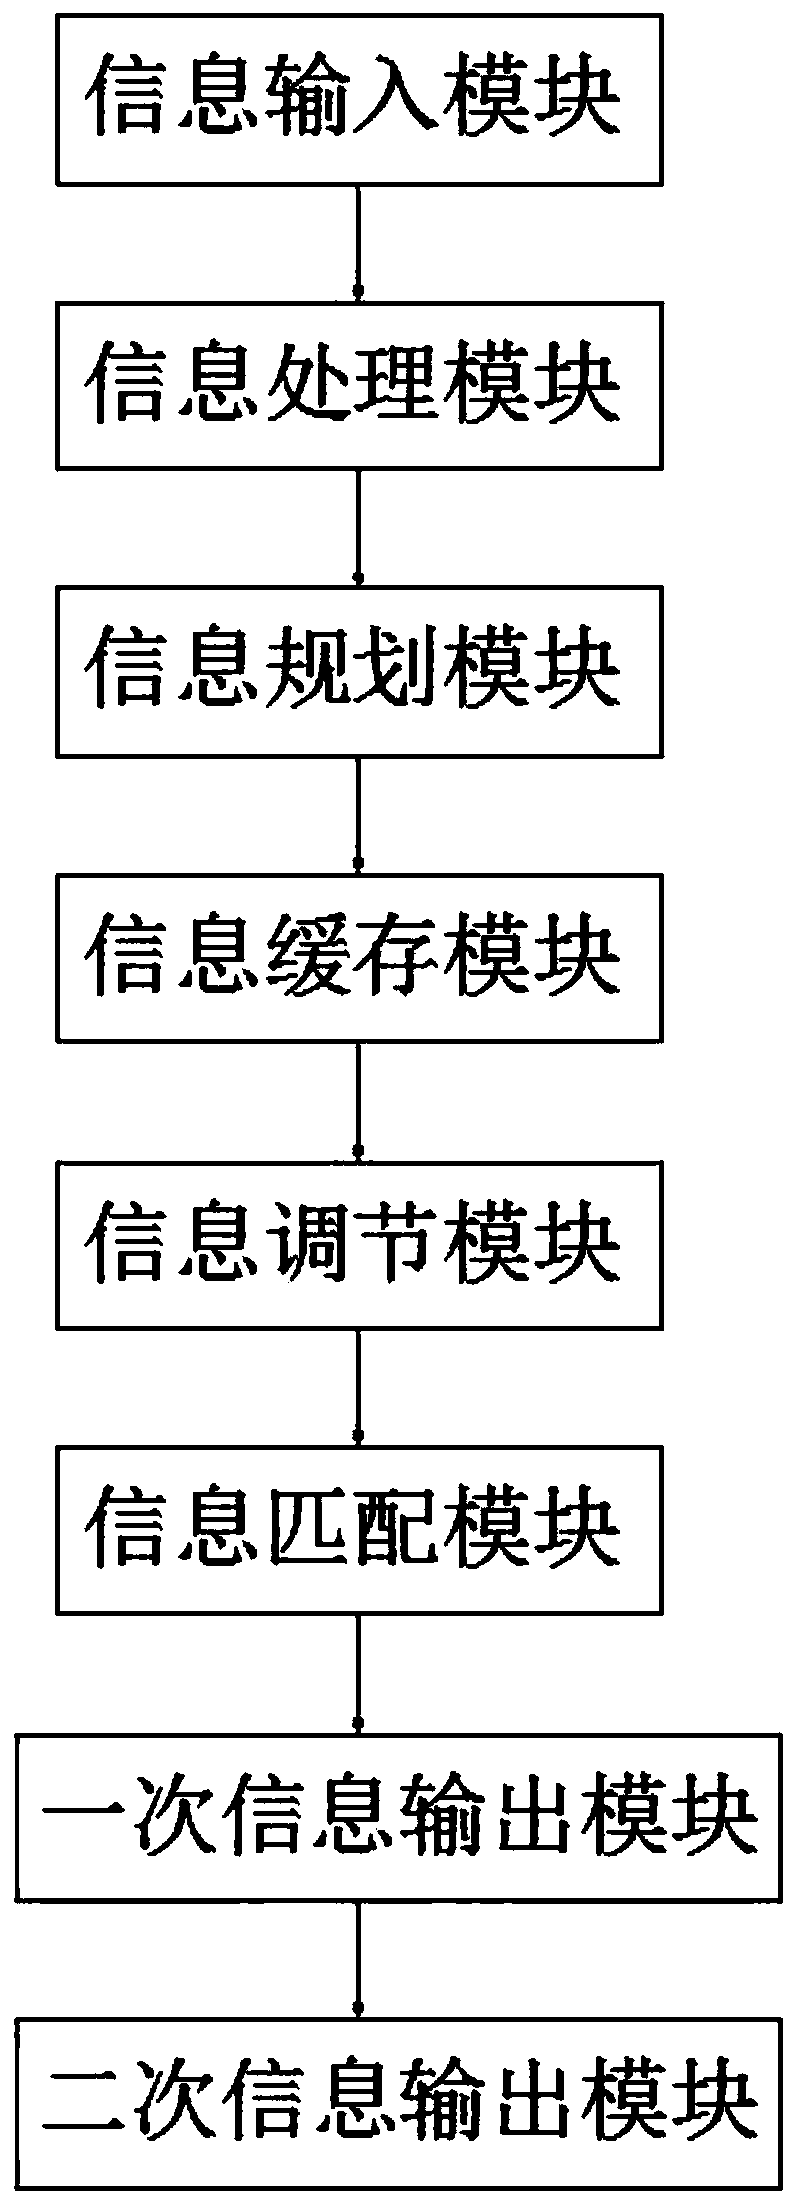 An information transmission method and system based on a communication interface